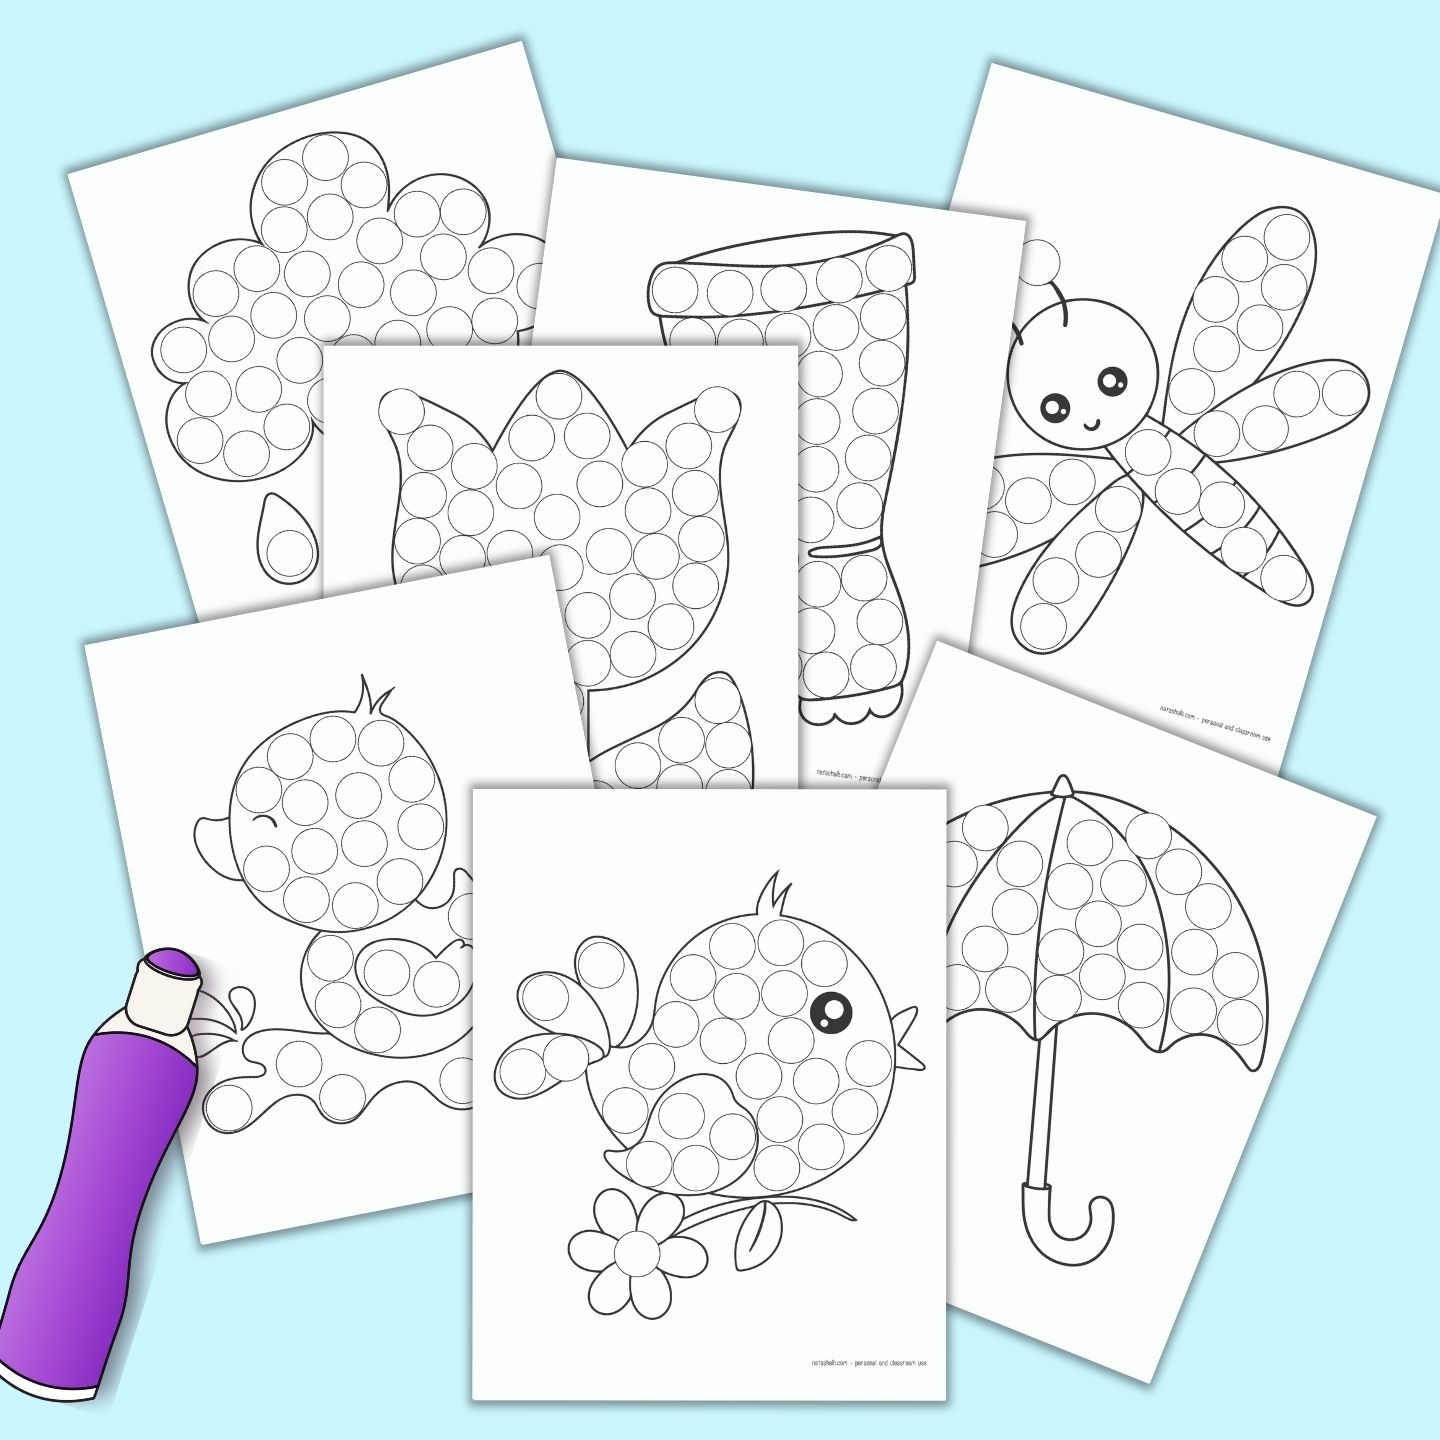 Free Printable Spring Do a Dot Marker Coloring Pages   The Artisan ...